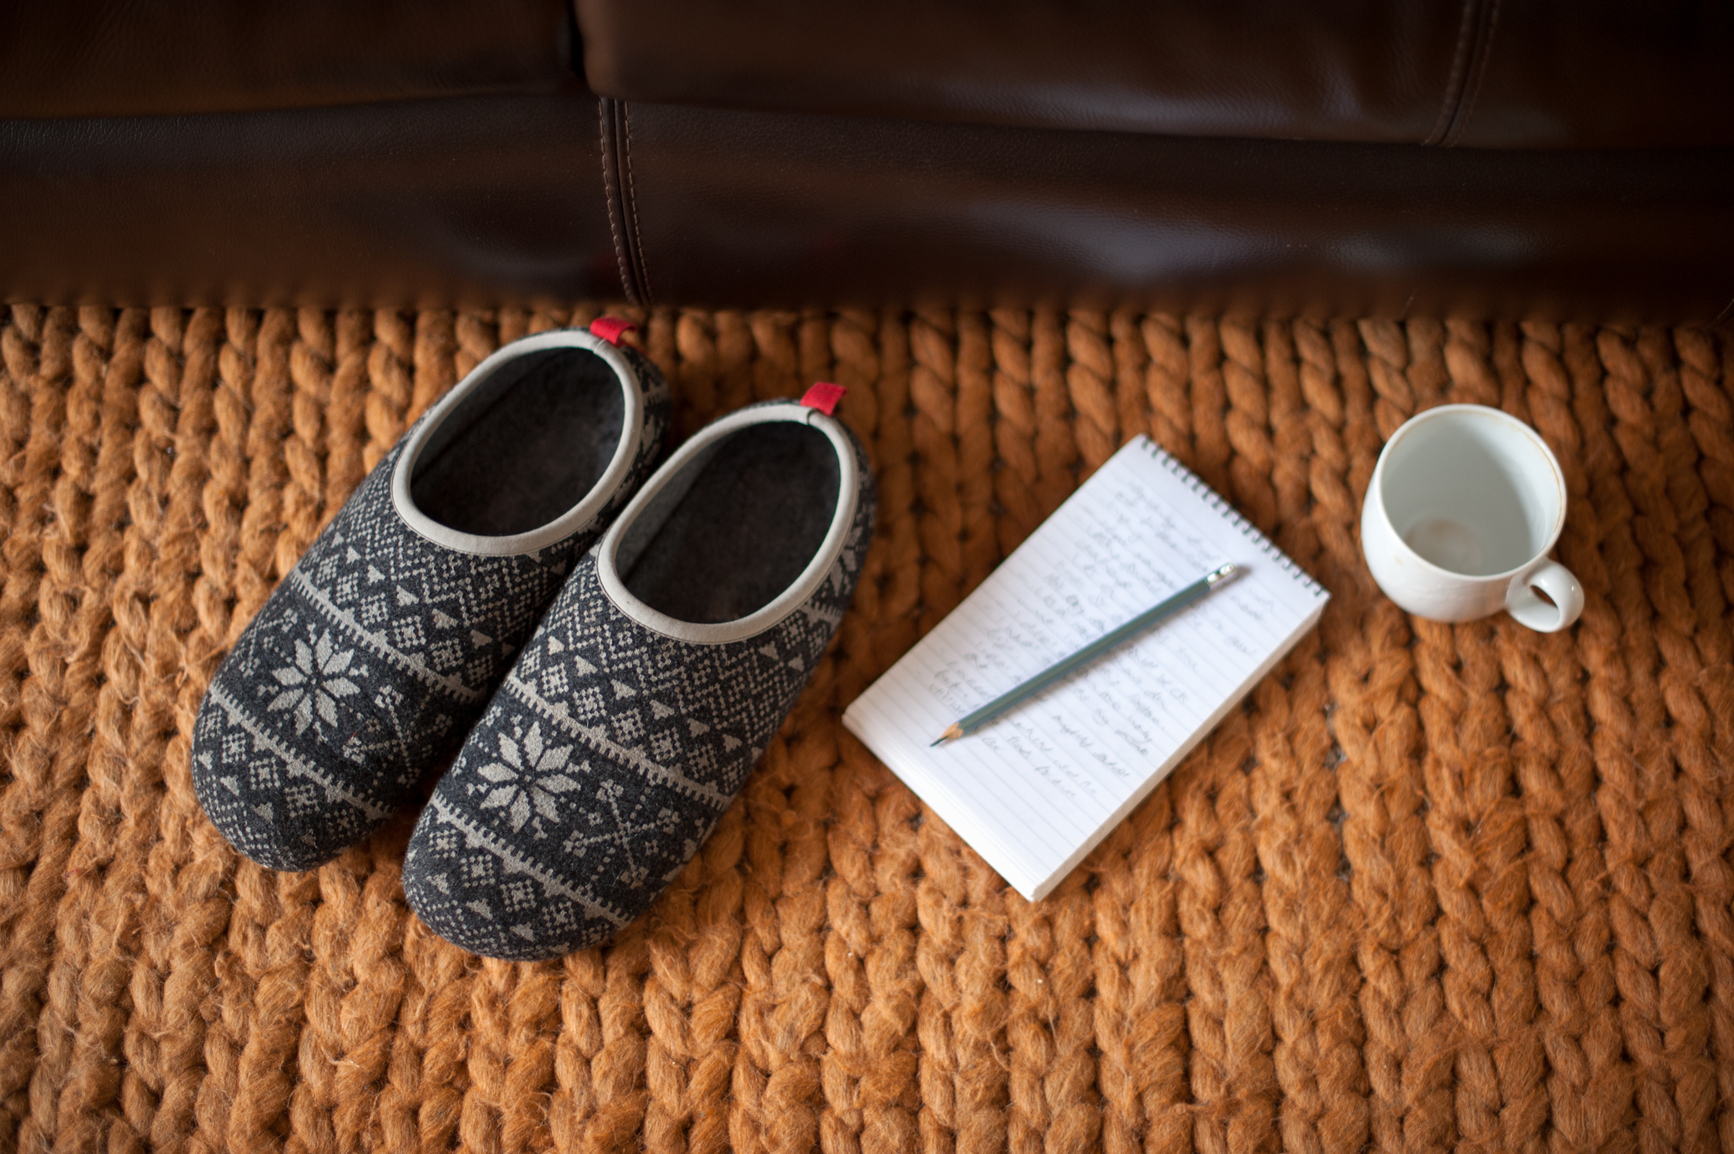 Image of slippers next to pencil and paper and mug on orange blanket